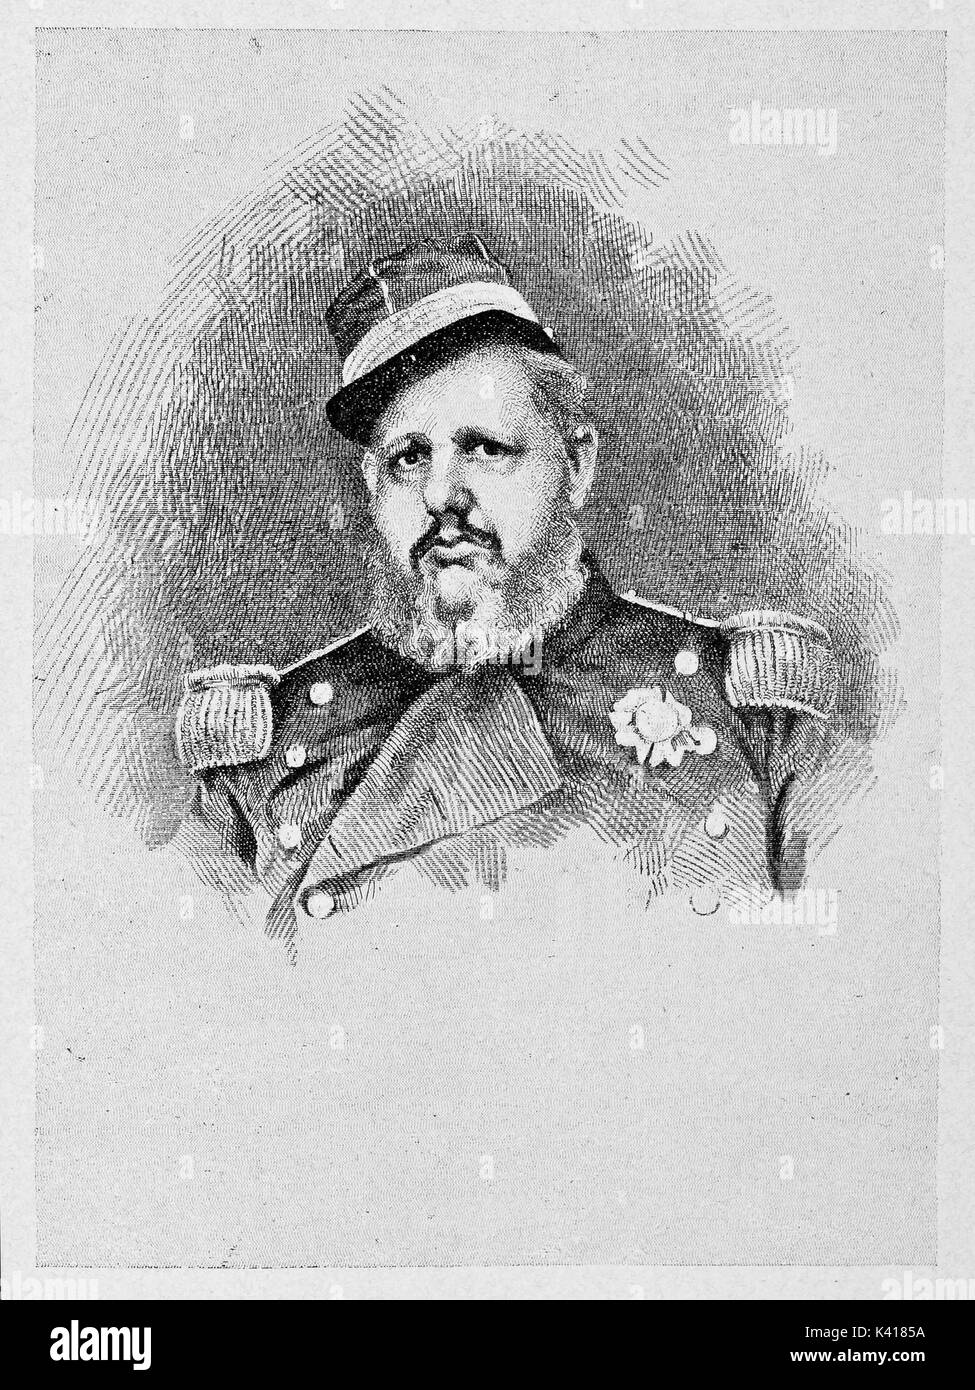 Ancient drawed bust portrait of Ferdinand II of the Two Sicilies (1810 - 1859). By E. Matania published on Garibaldi e i Suoi Tempi Milan Italy 1884 Stock Photo